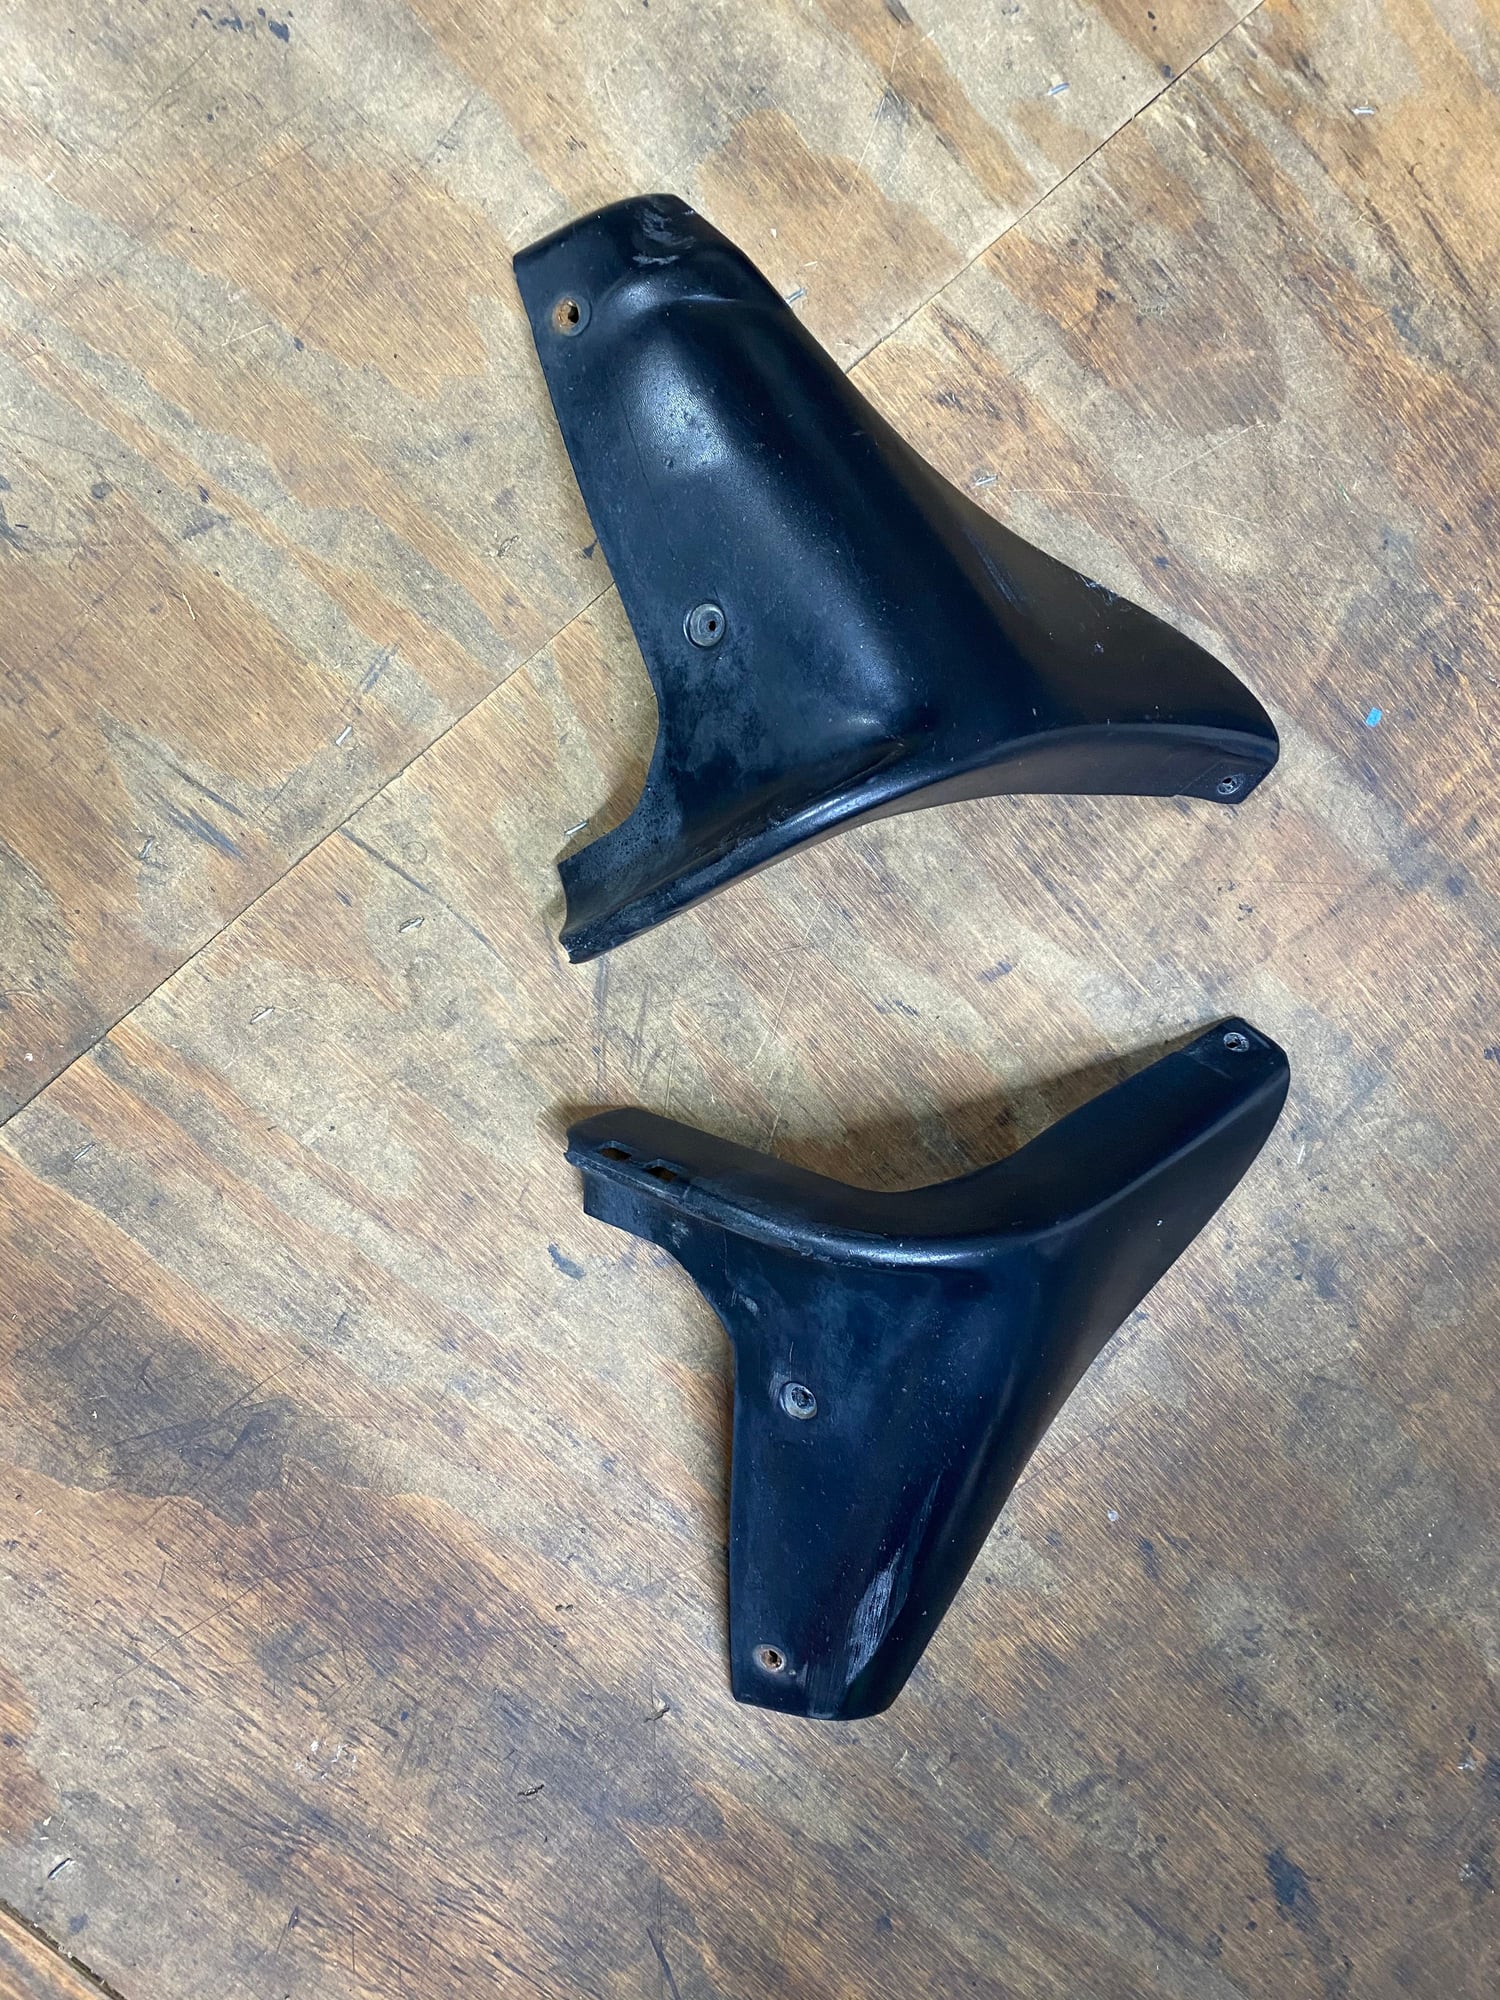 Exterior Body Parts - FD RX-7 Rear OEM Mud guards - Used - 1992 to 2002 Mazda RX-7 - Prince Frederick, MD 20678, United States